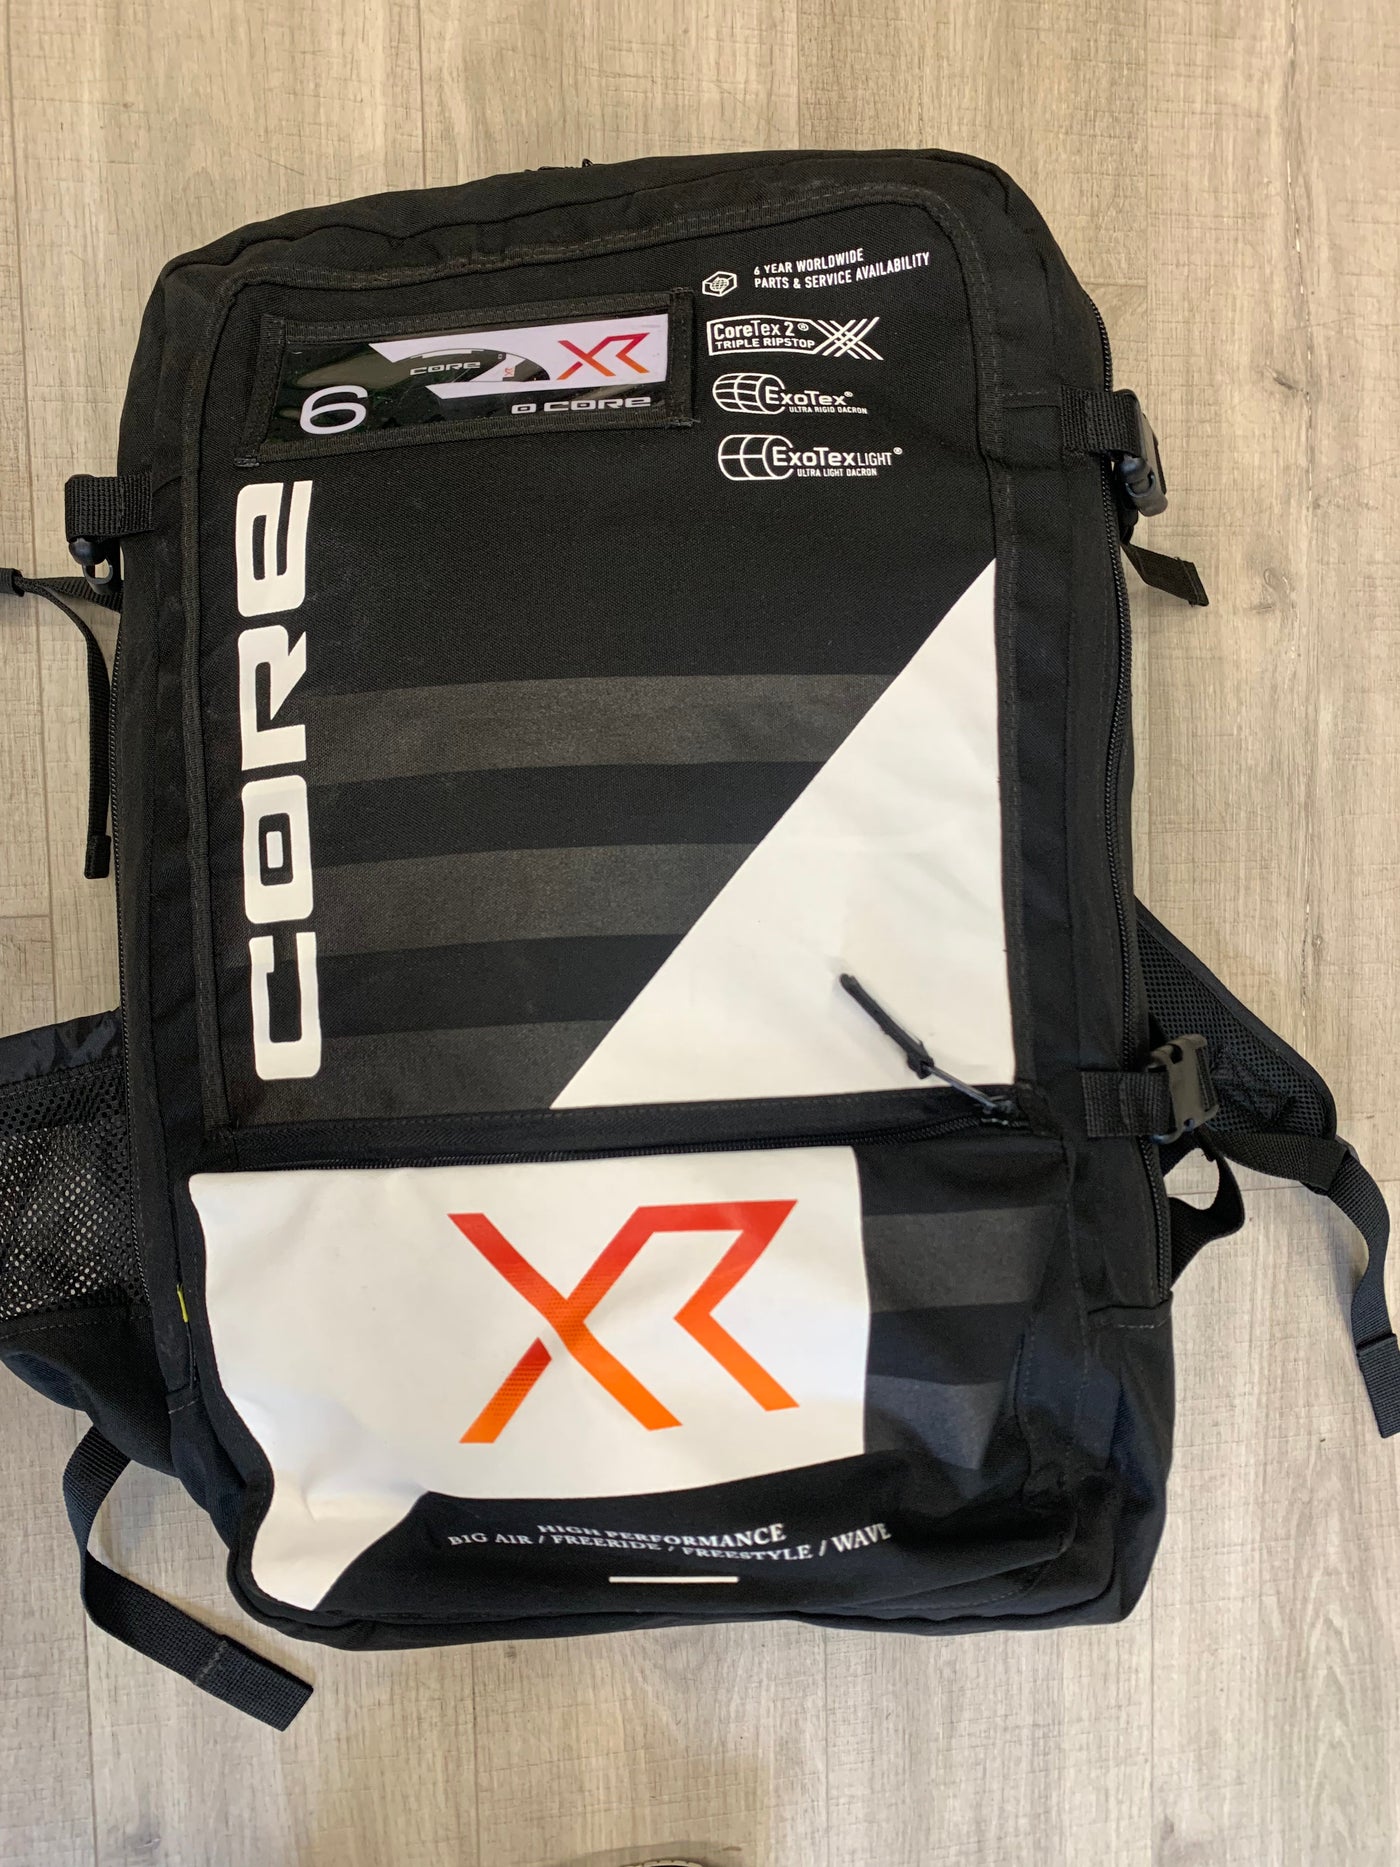 Used Core XR7 6m CORE